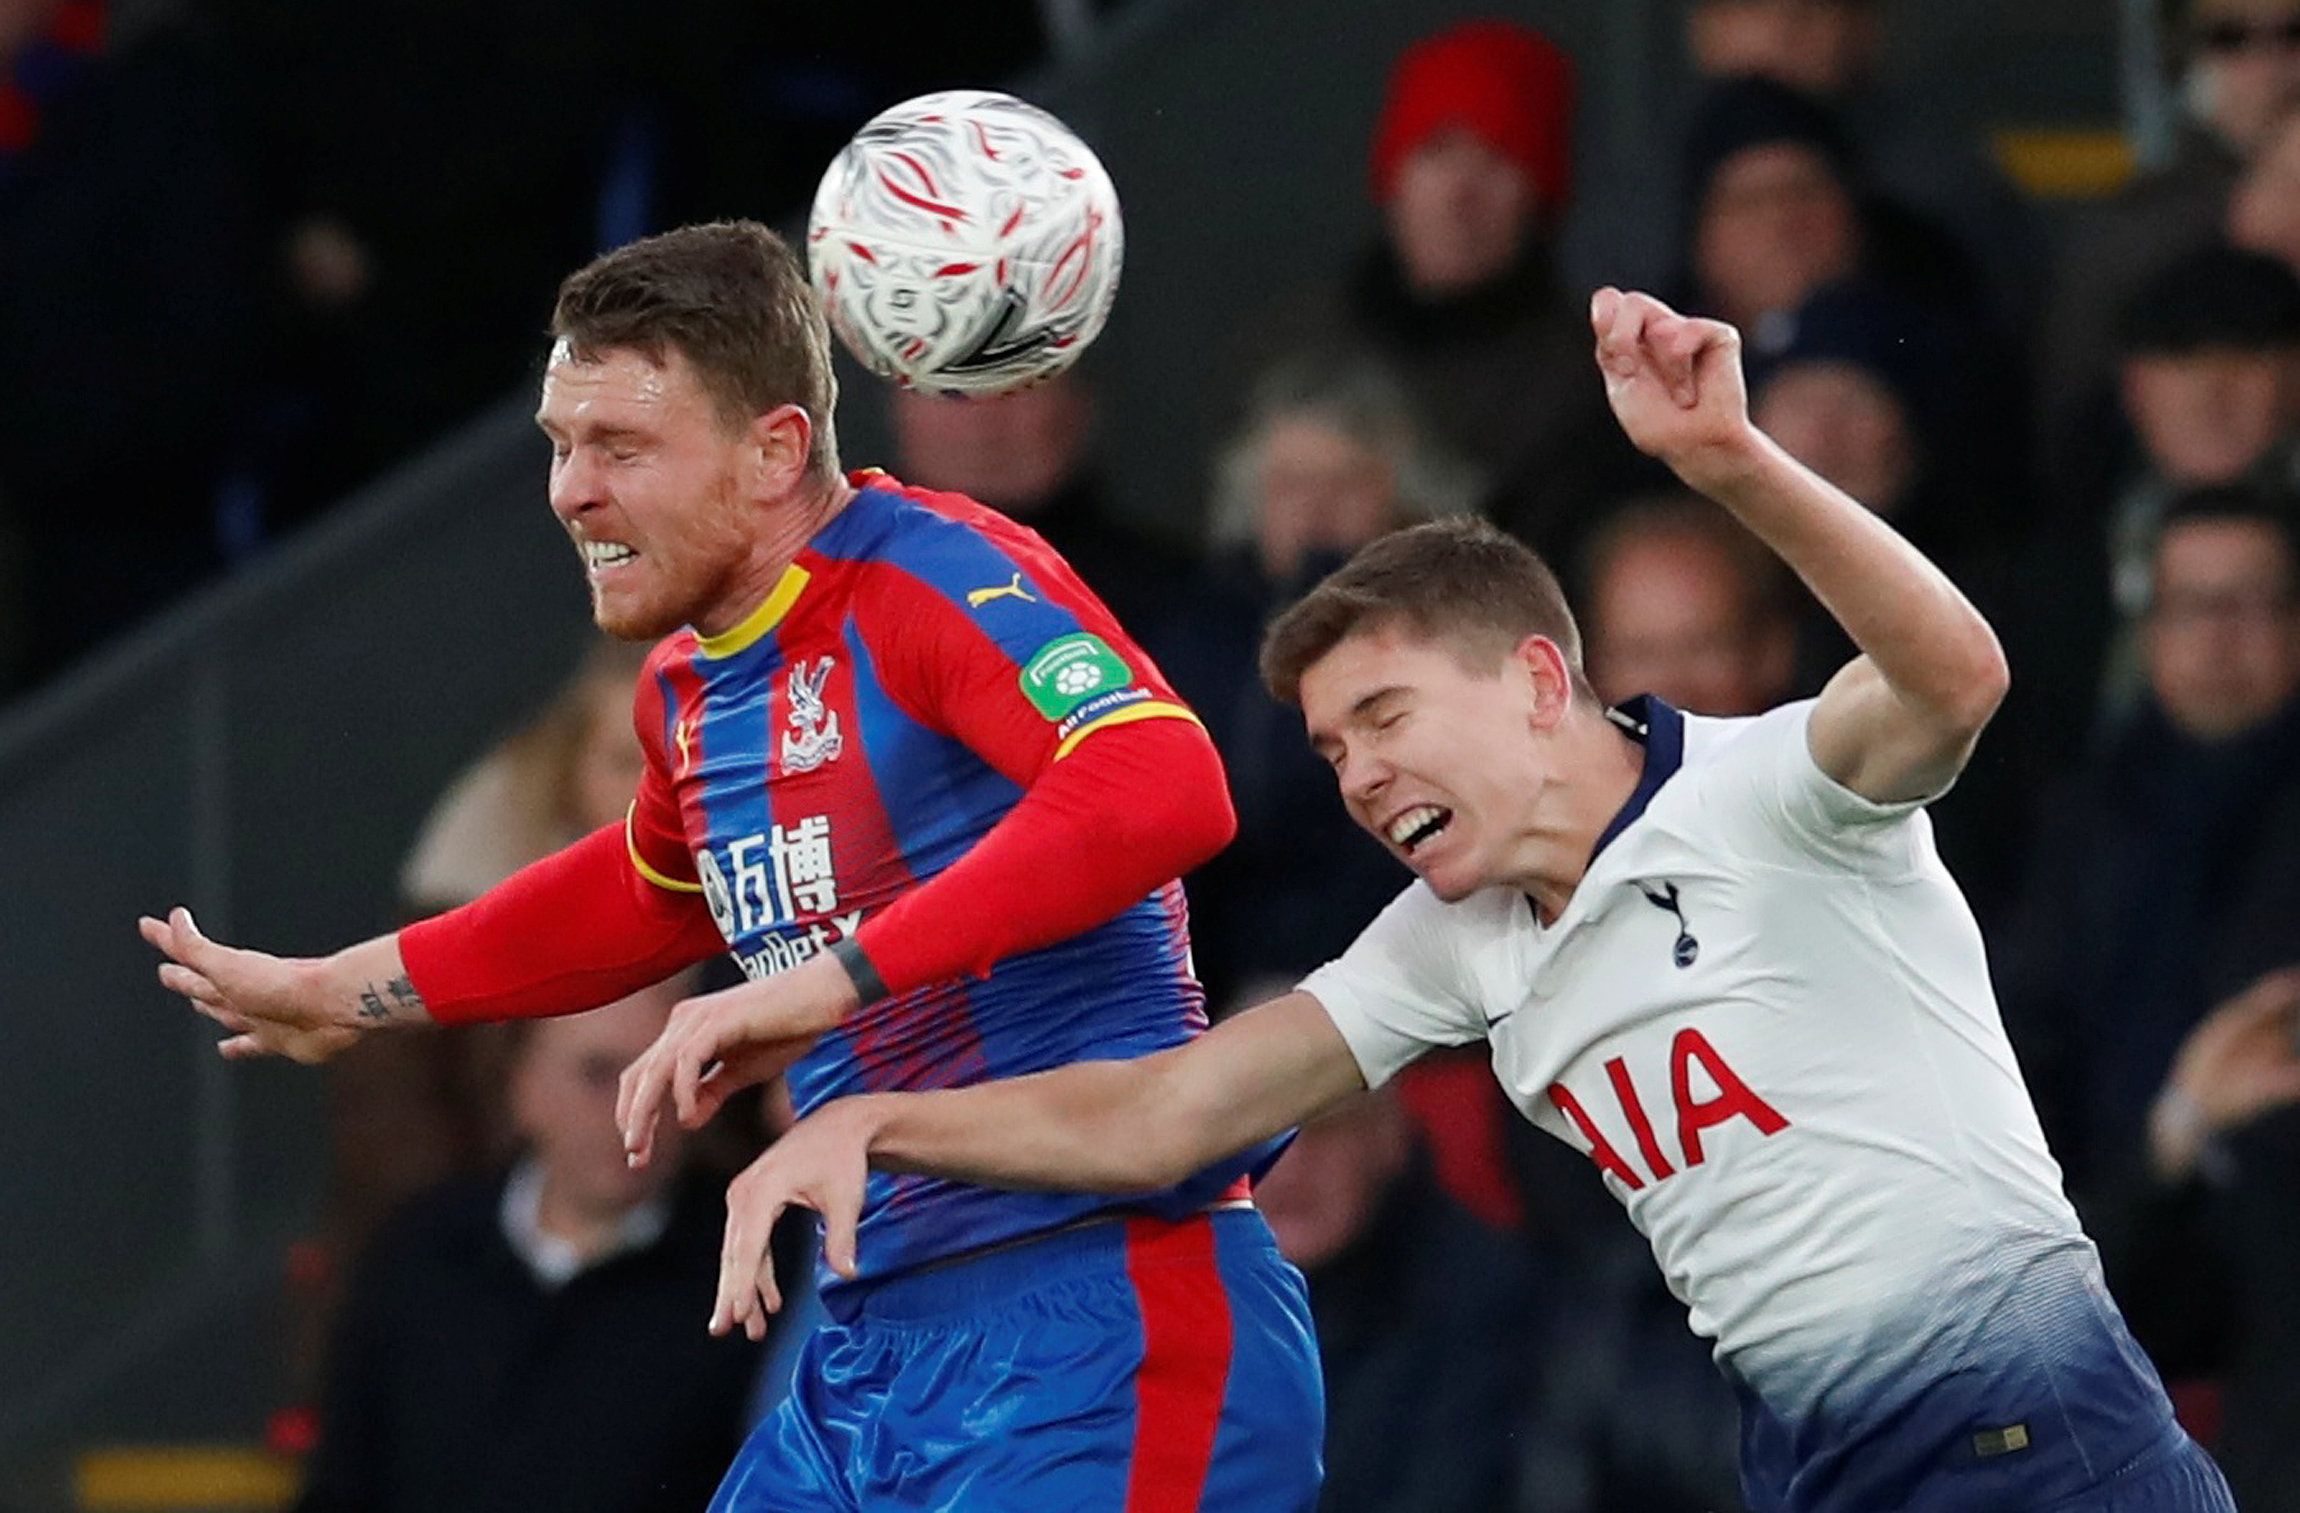 Soccer Football - FA Cup Fourth Round - Crystal Palace v Tottenham Hotspur - Selhurst Park, London, Britain - January 27, 2019  Tottenham's Juan Foyth in action with Crystal Palace's Connor Wickham    REUTERS/David Klein